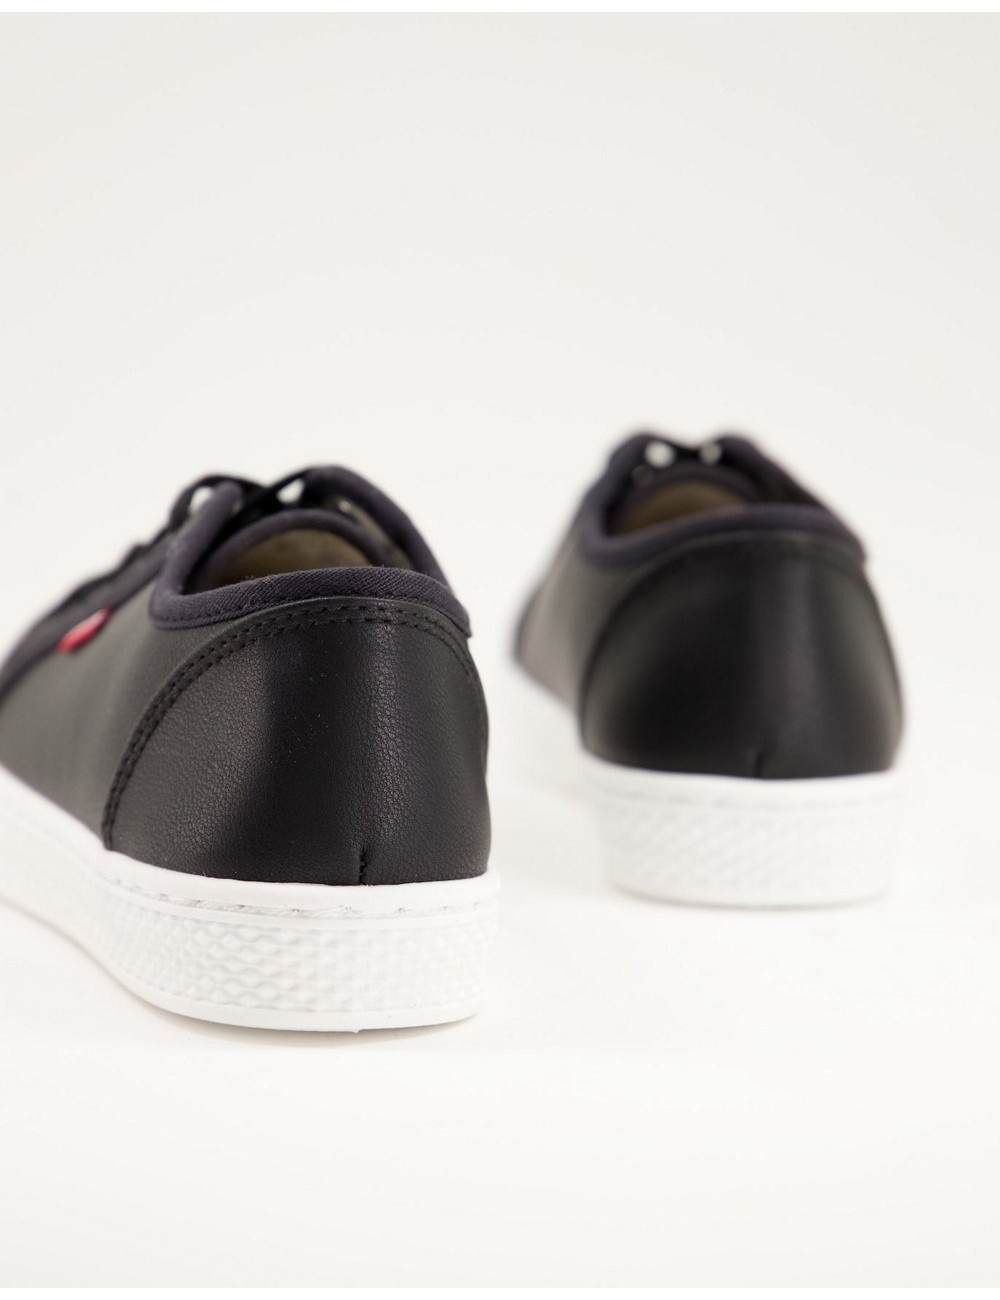 Levi's recycled PU sneaker...